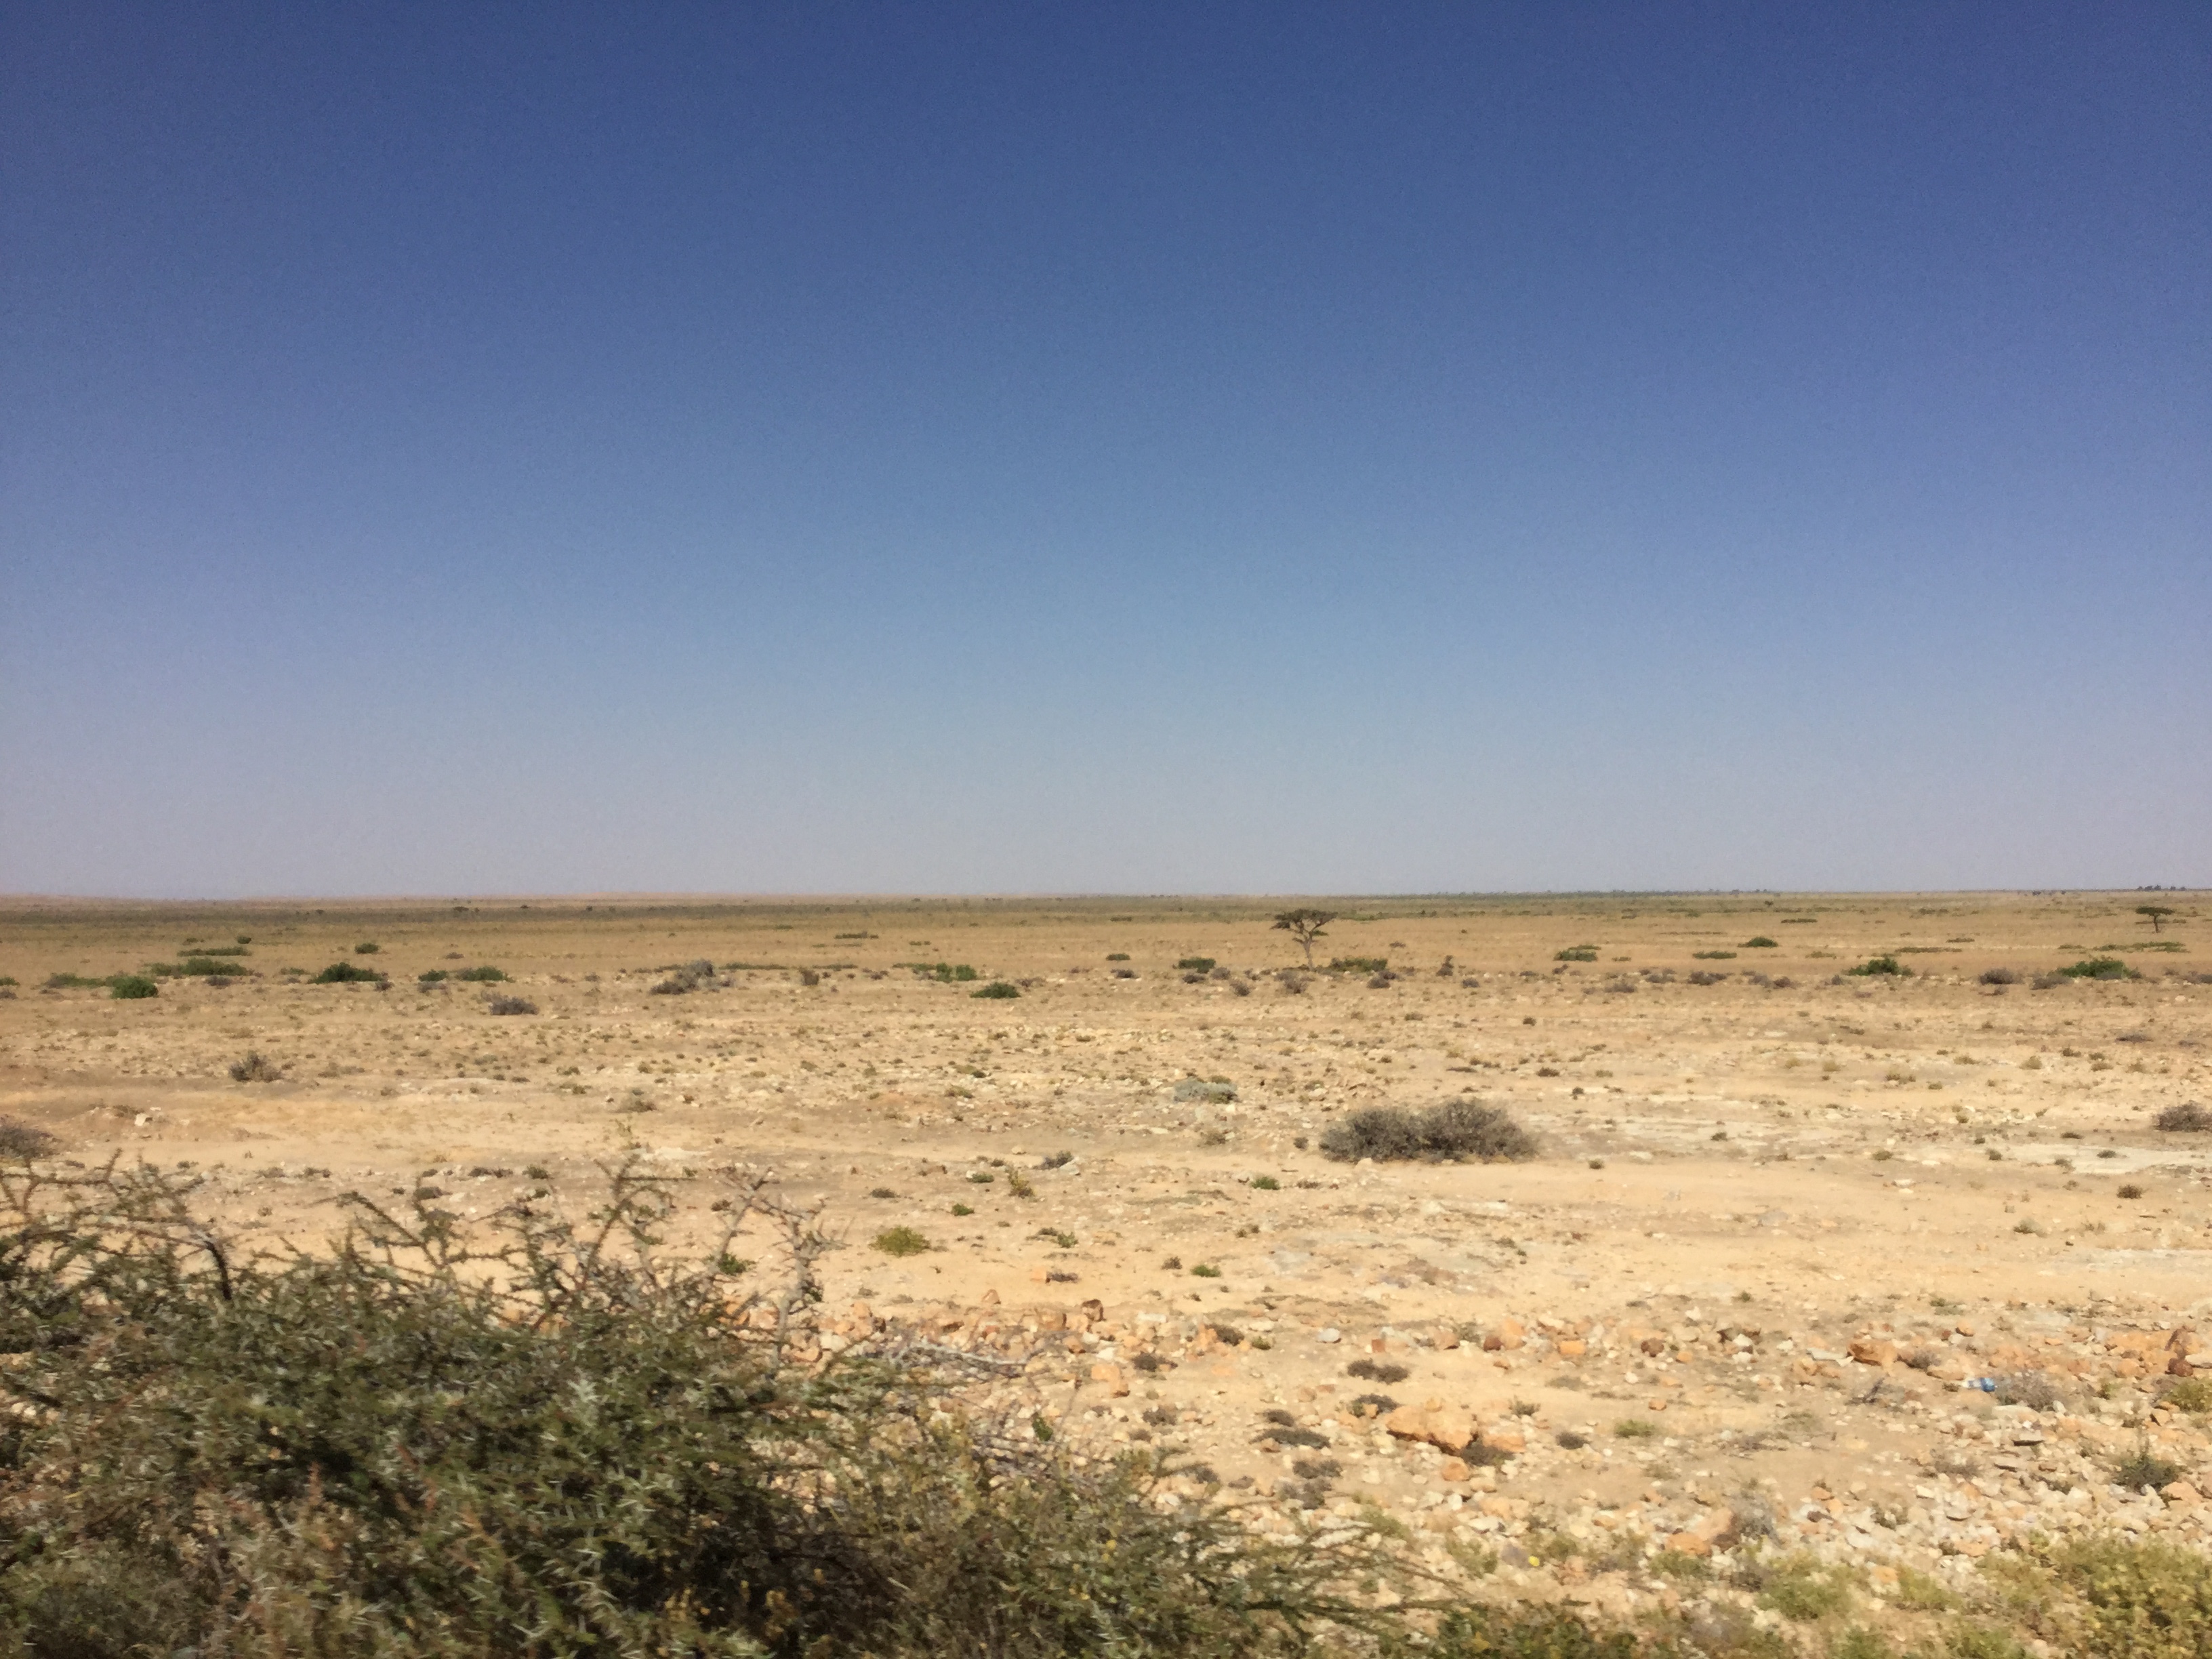 Barren landscape in Somaliland on the road to Laas Caanood